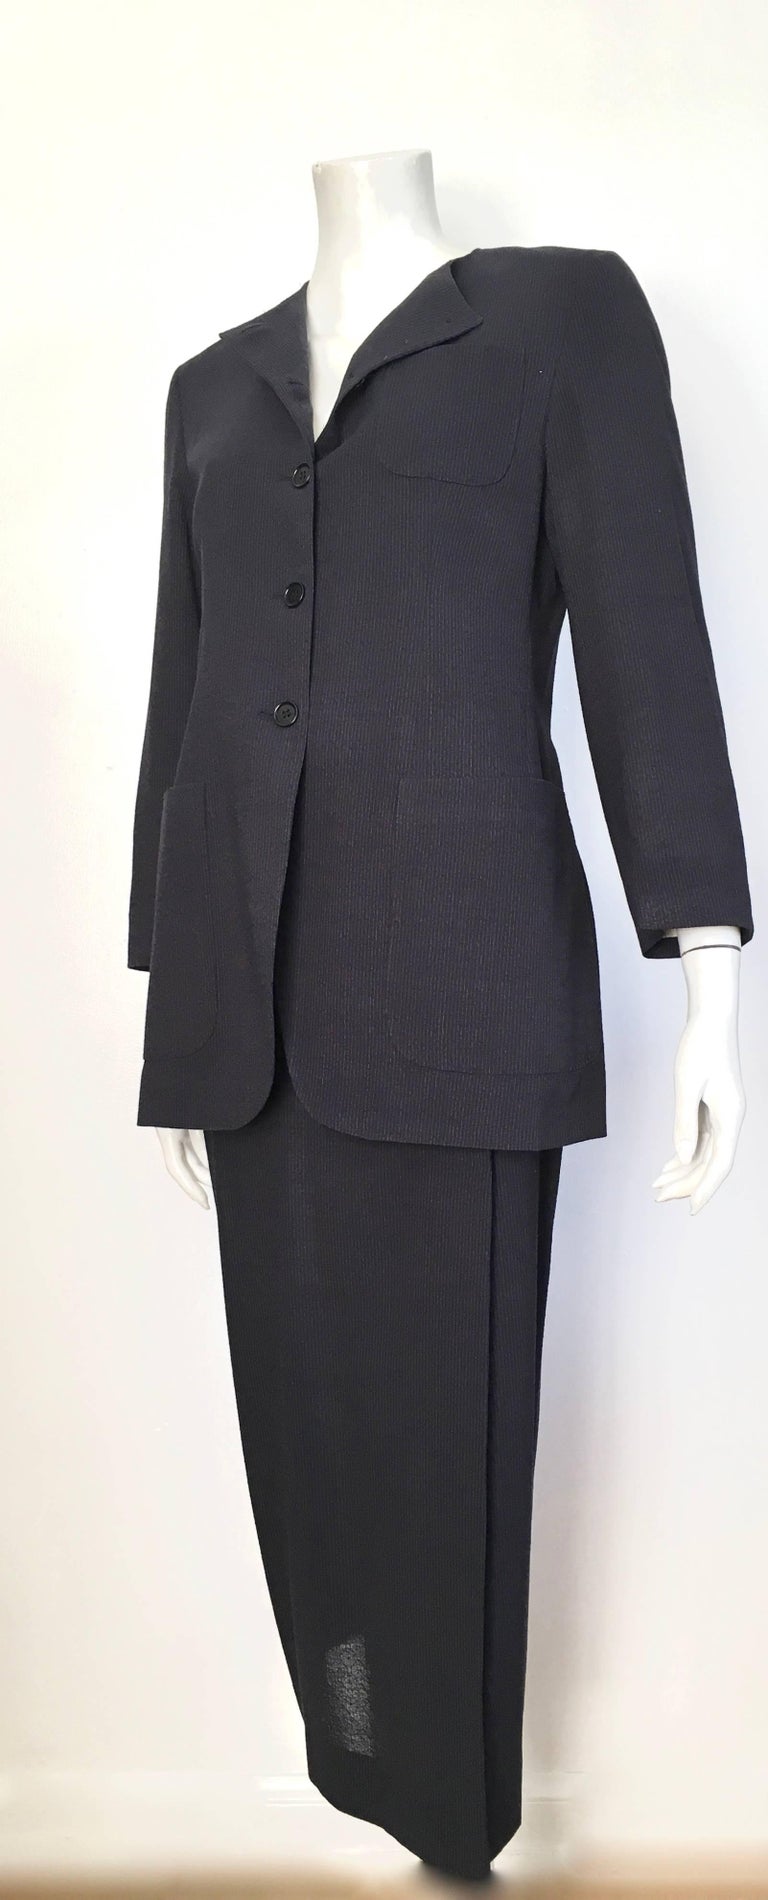 Romeo Gigli 1980s Wool Navy Jacket and Wrap Skirt Suit Size 6. For Sale ...